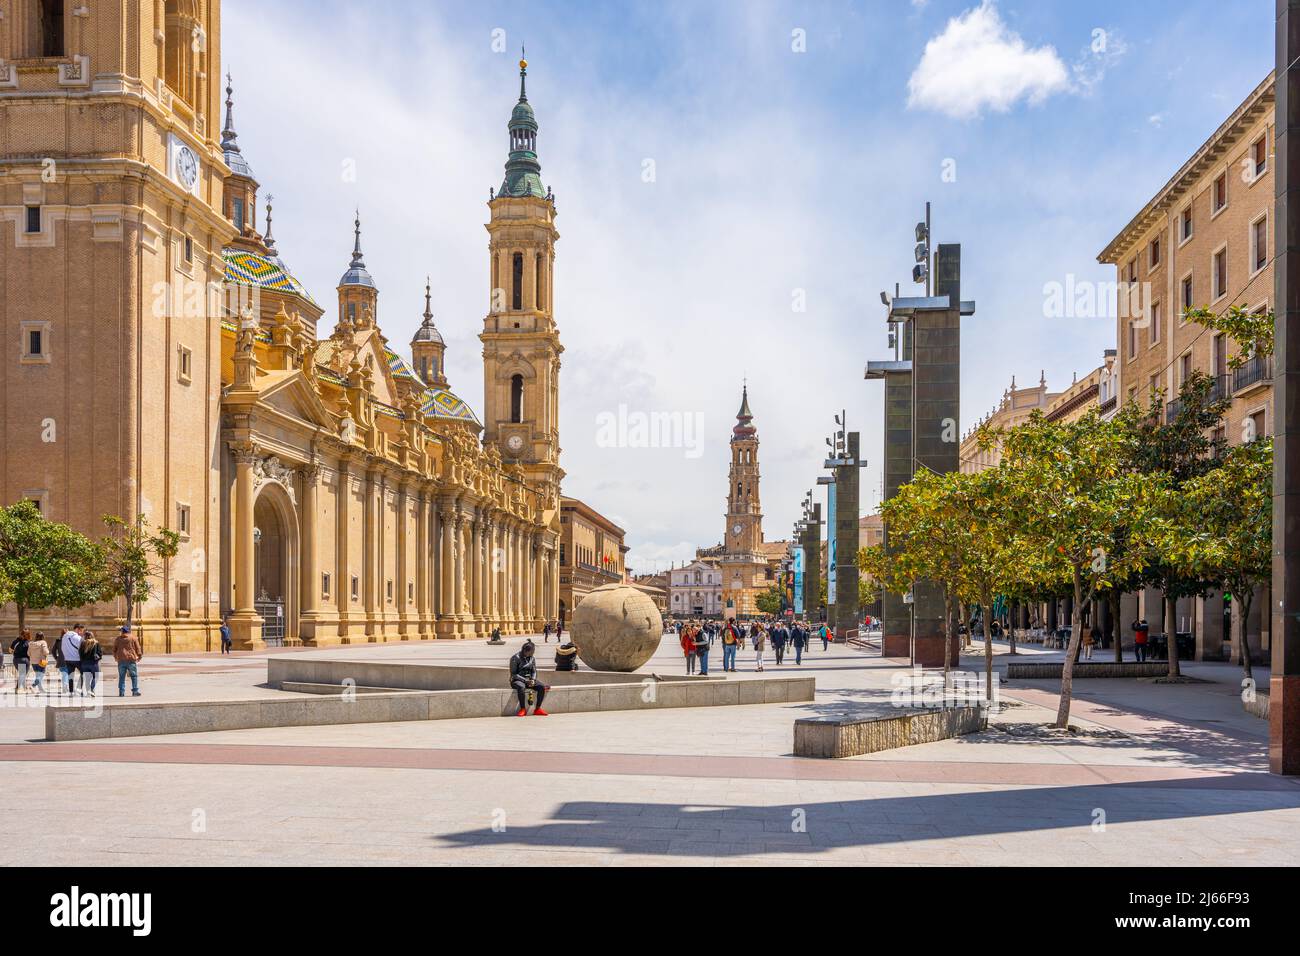 Zaragoza, Spain - April 21 2022 - The Basilica of Our Lady of the Pillar seen from the Plaza (square) de Nuestra Señora del Pilar Stock Photo